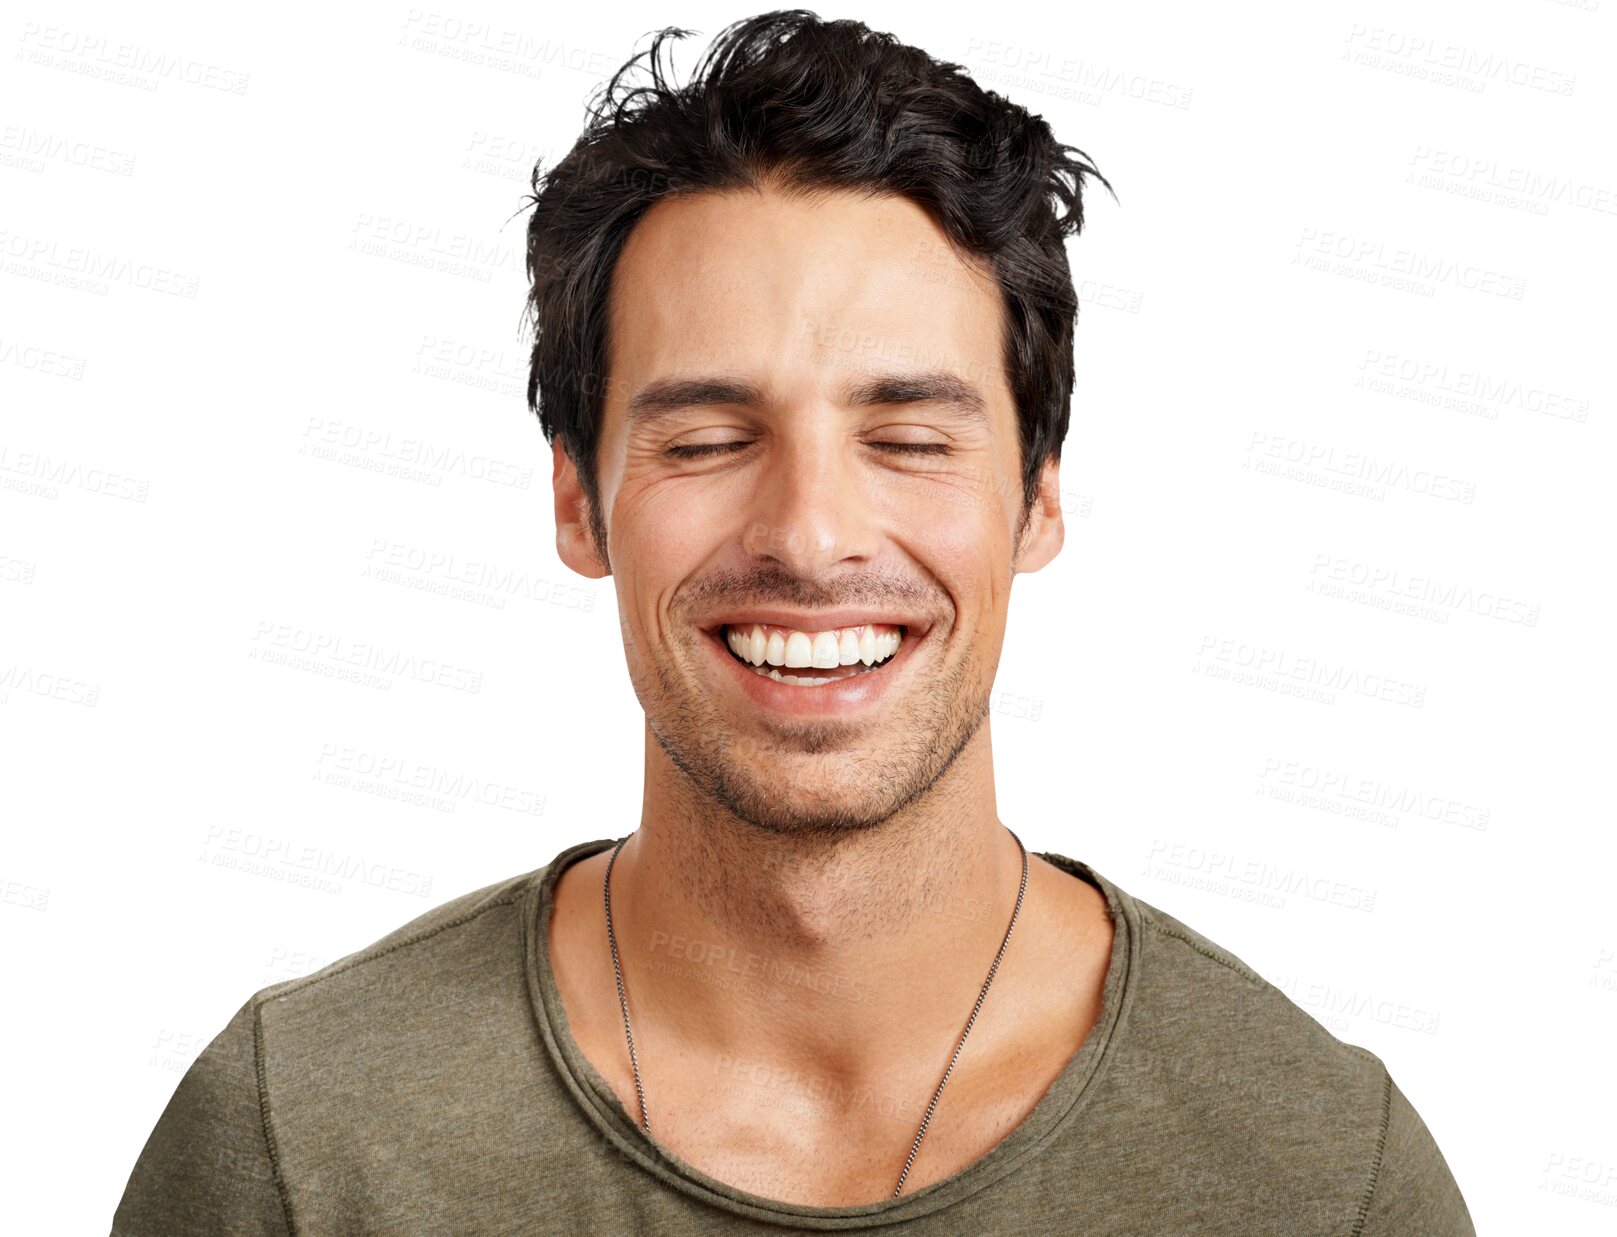 Buy stock photo Isolated man, eyes closed and happy with thinking, ideas and memory by transparent png background. Young student guy, brainstorming and imagine with smile, remember or excited for future vision